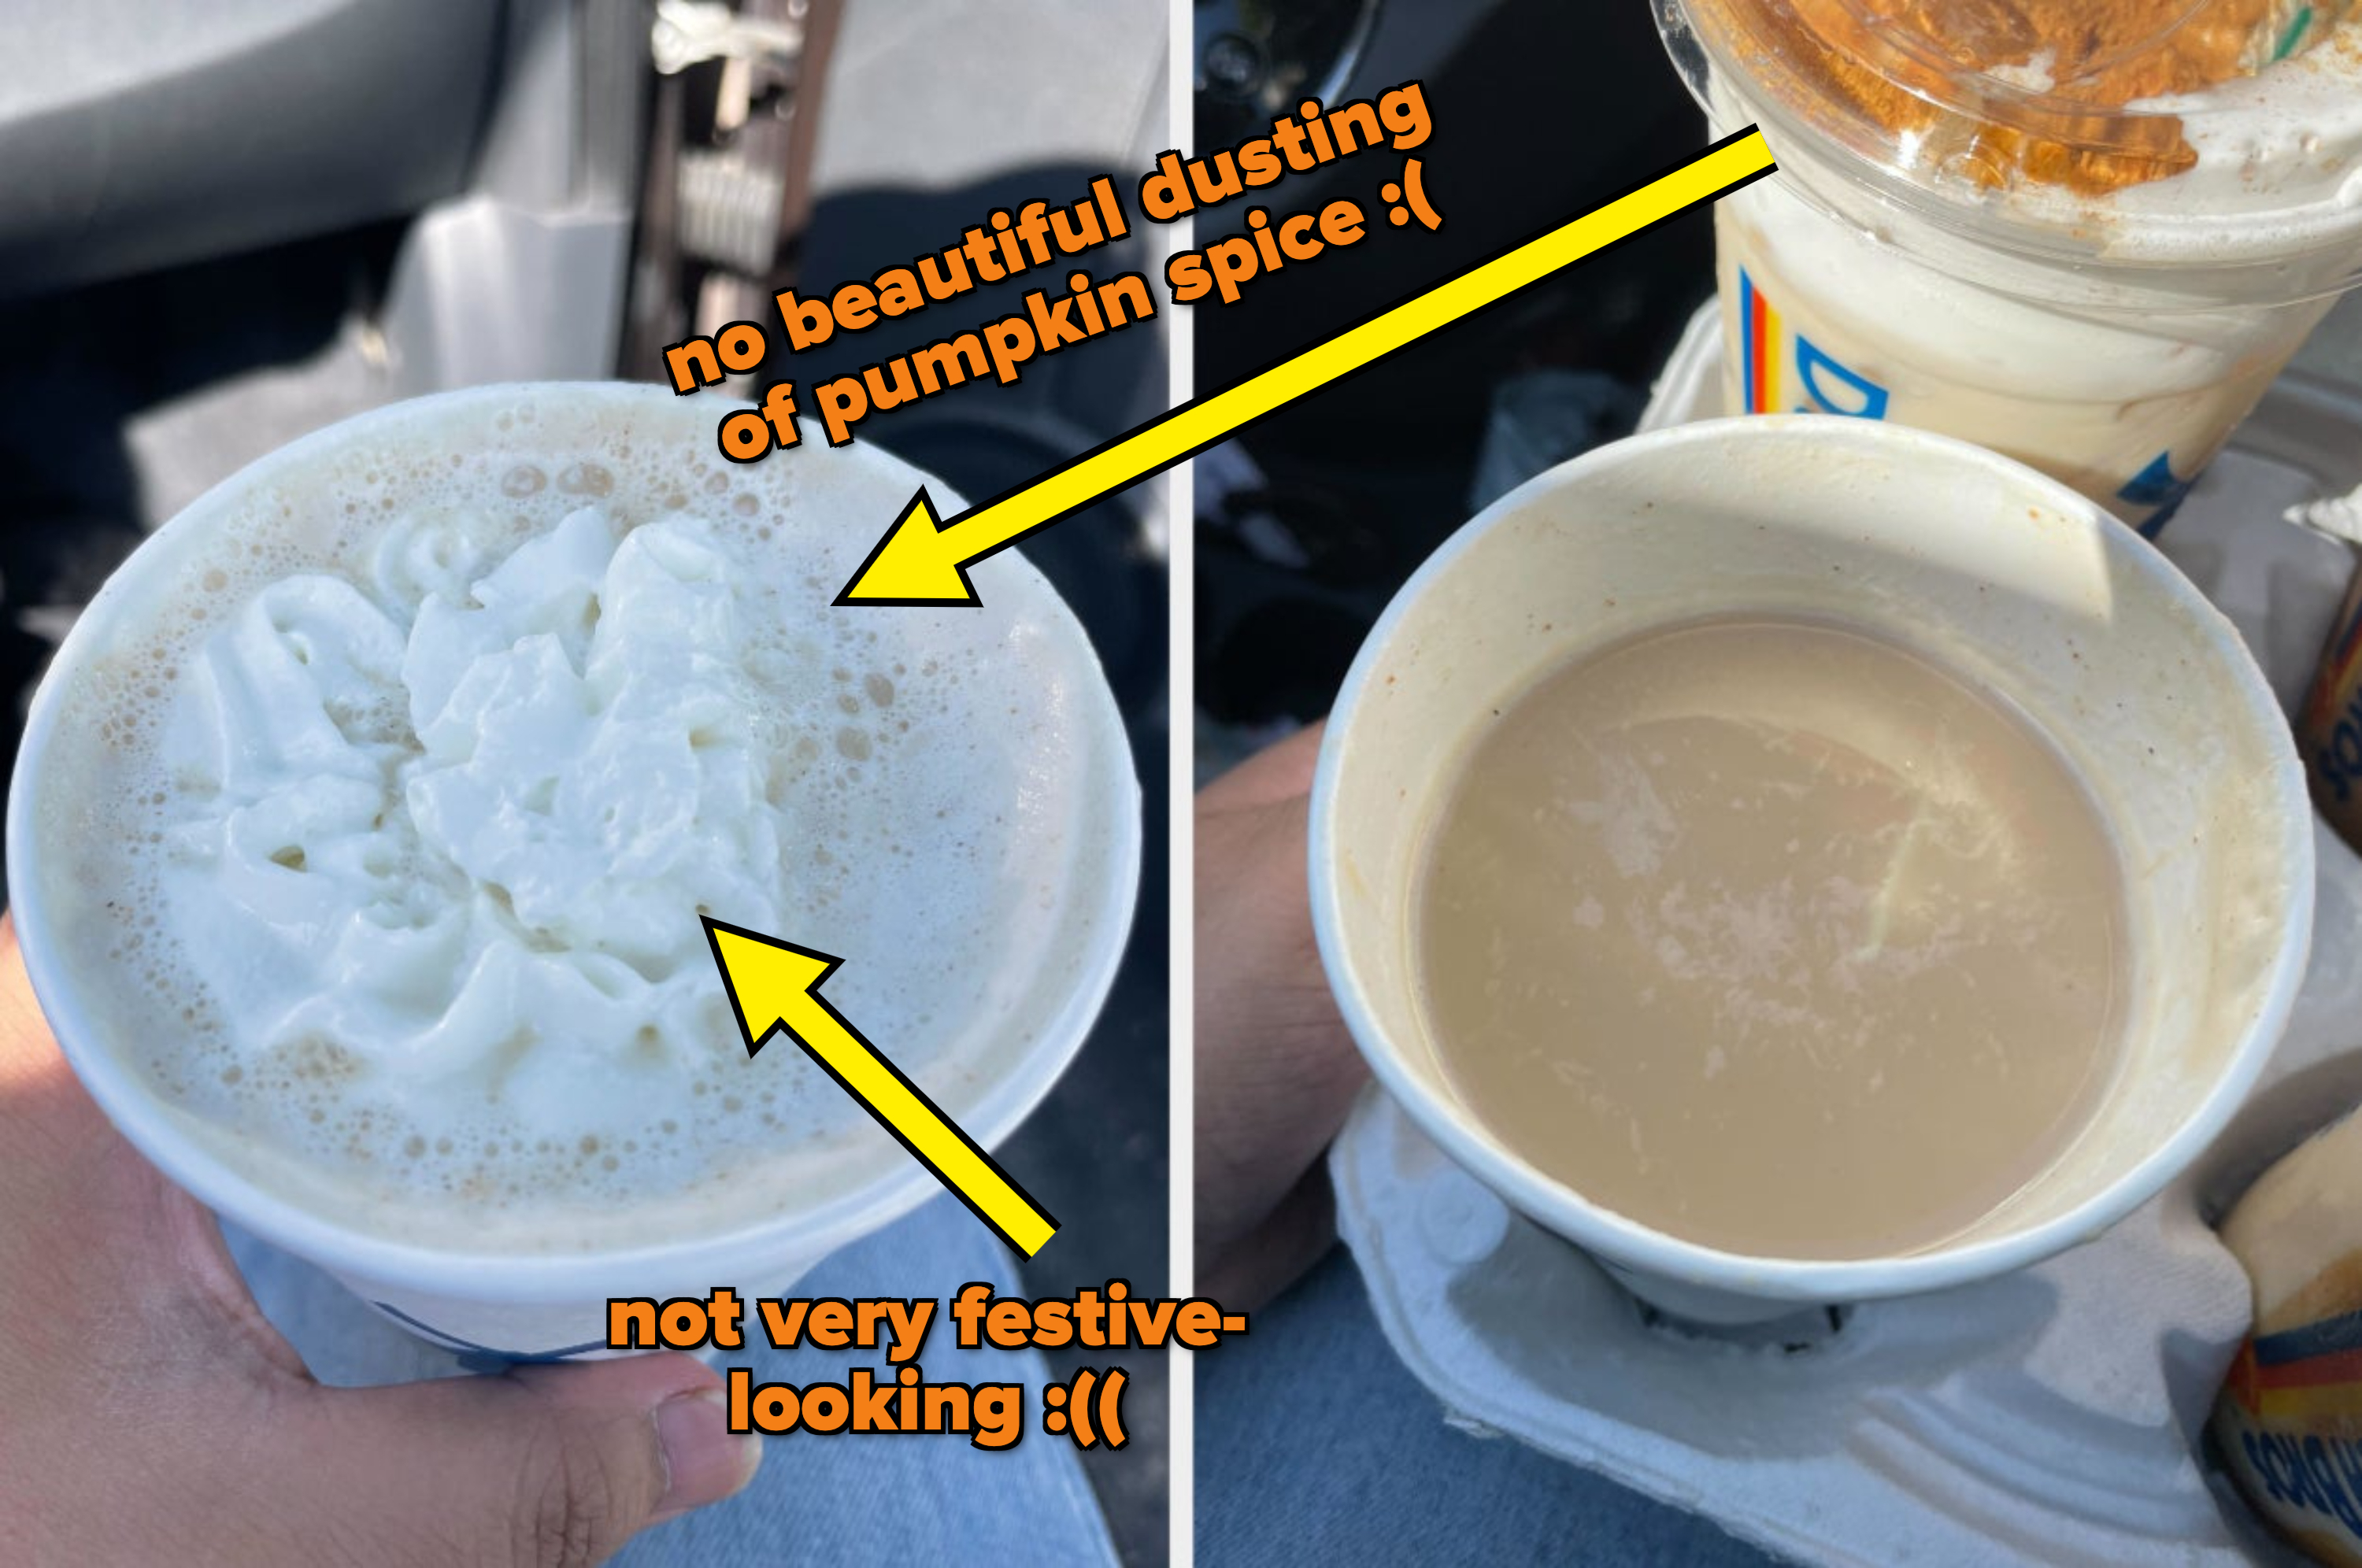 The Dutch Bros coffee is shown without the lid on